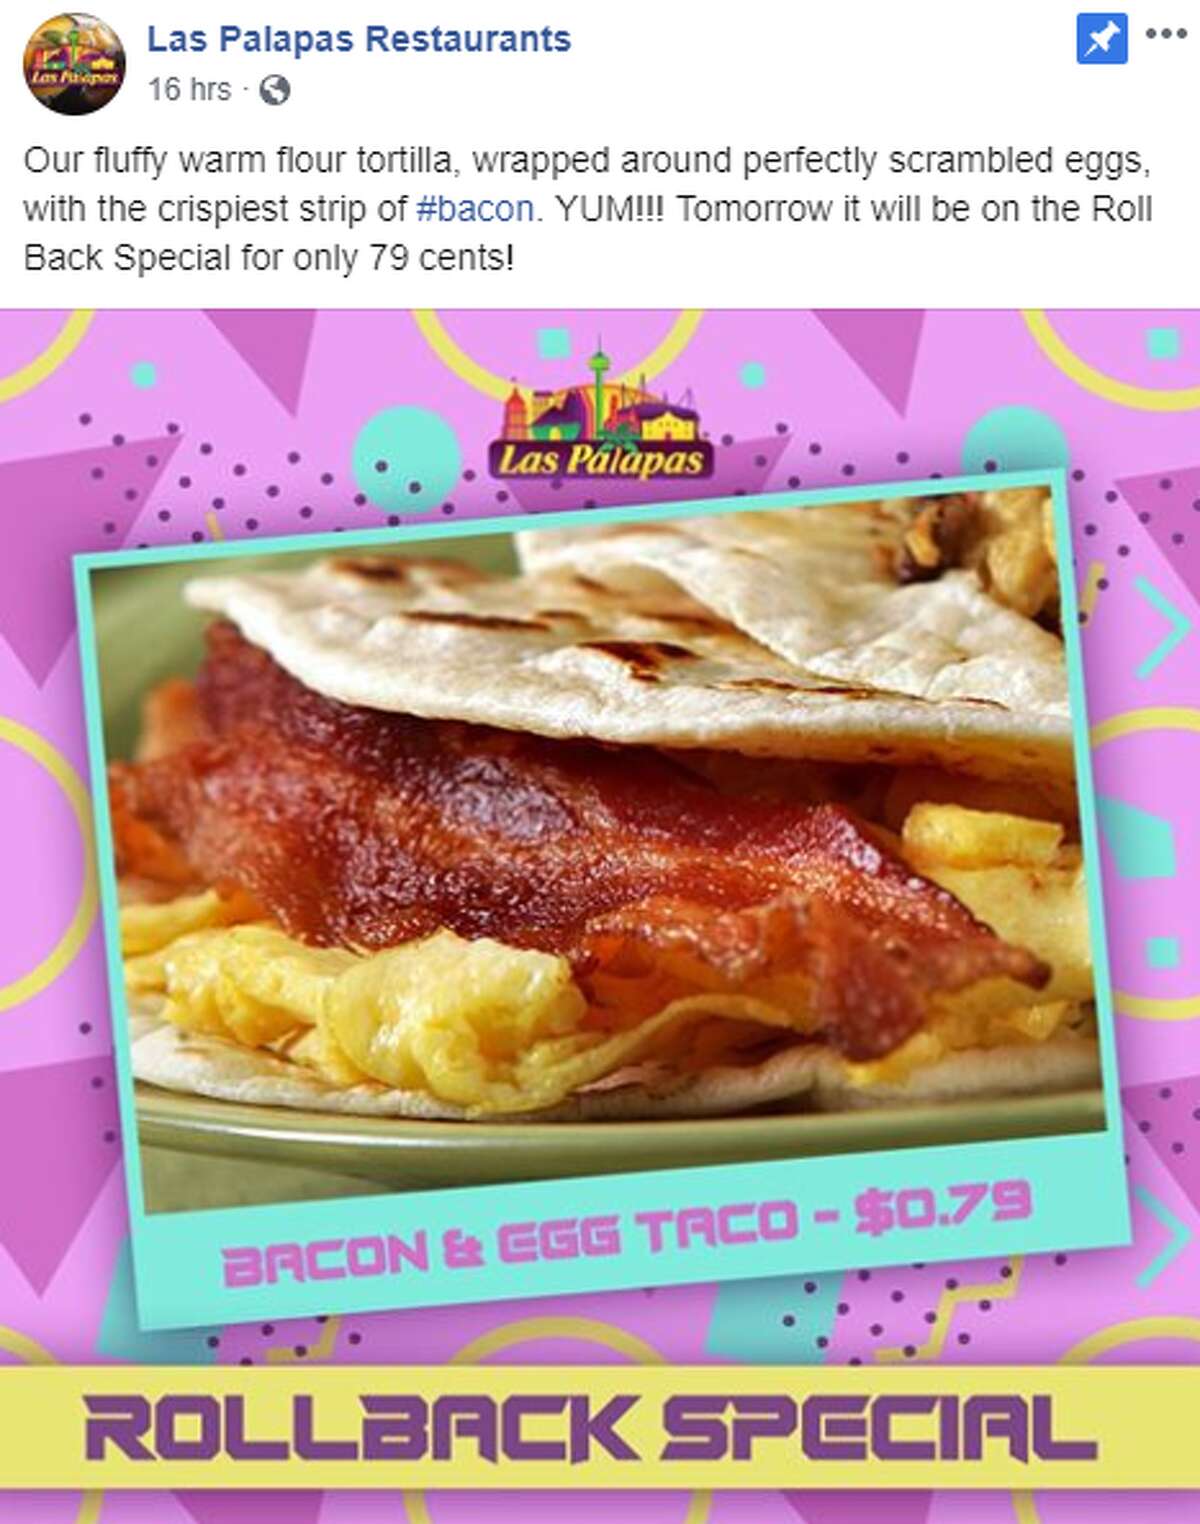 San Antonio chain Las Palapas is going way back this Wednesday with a rollback special on bacon and egg tacos.